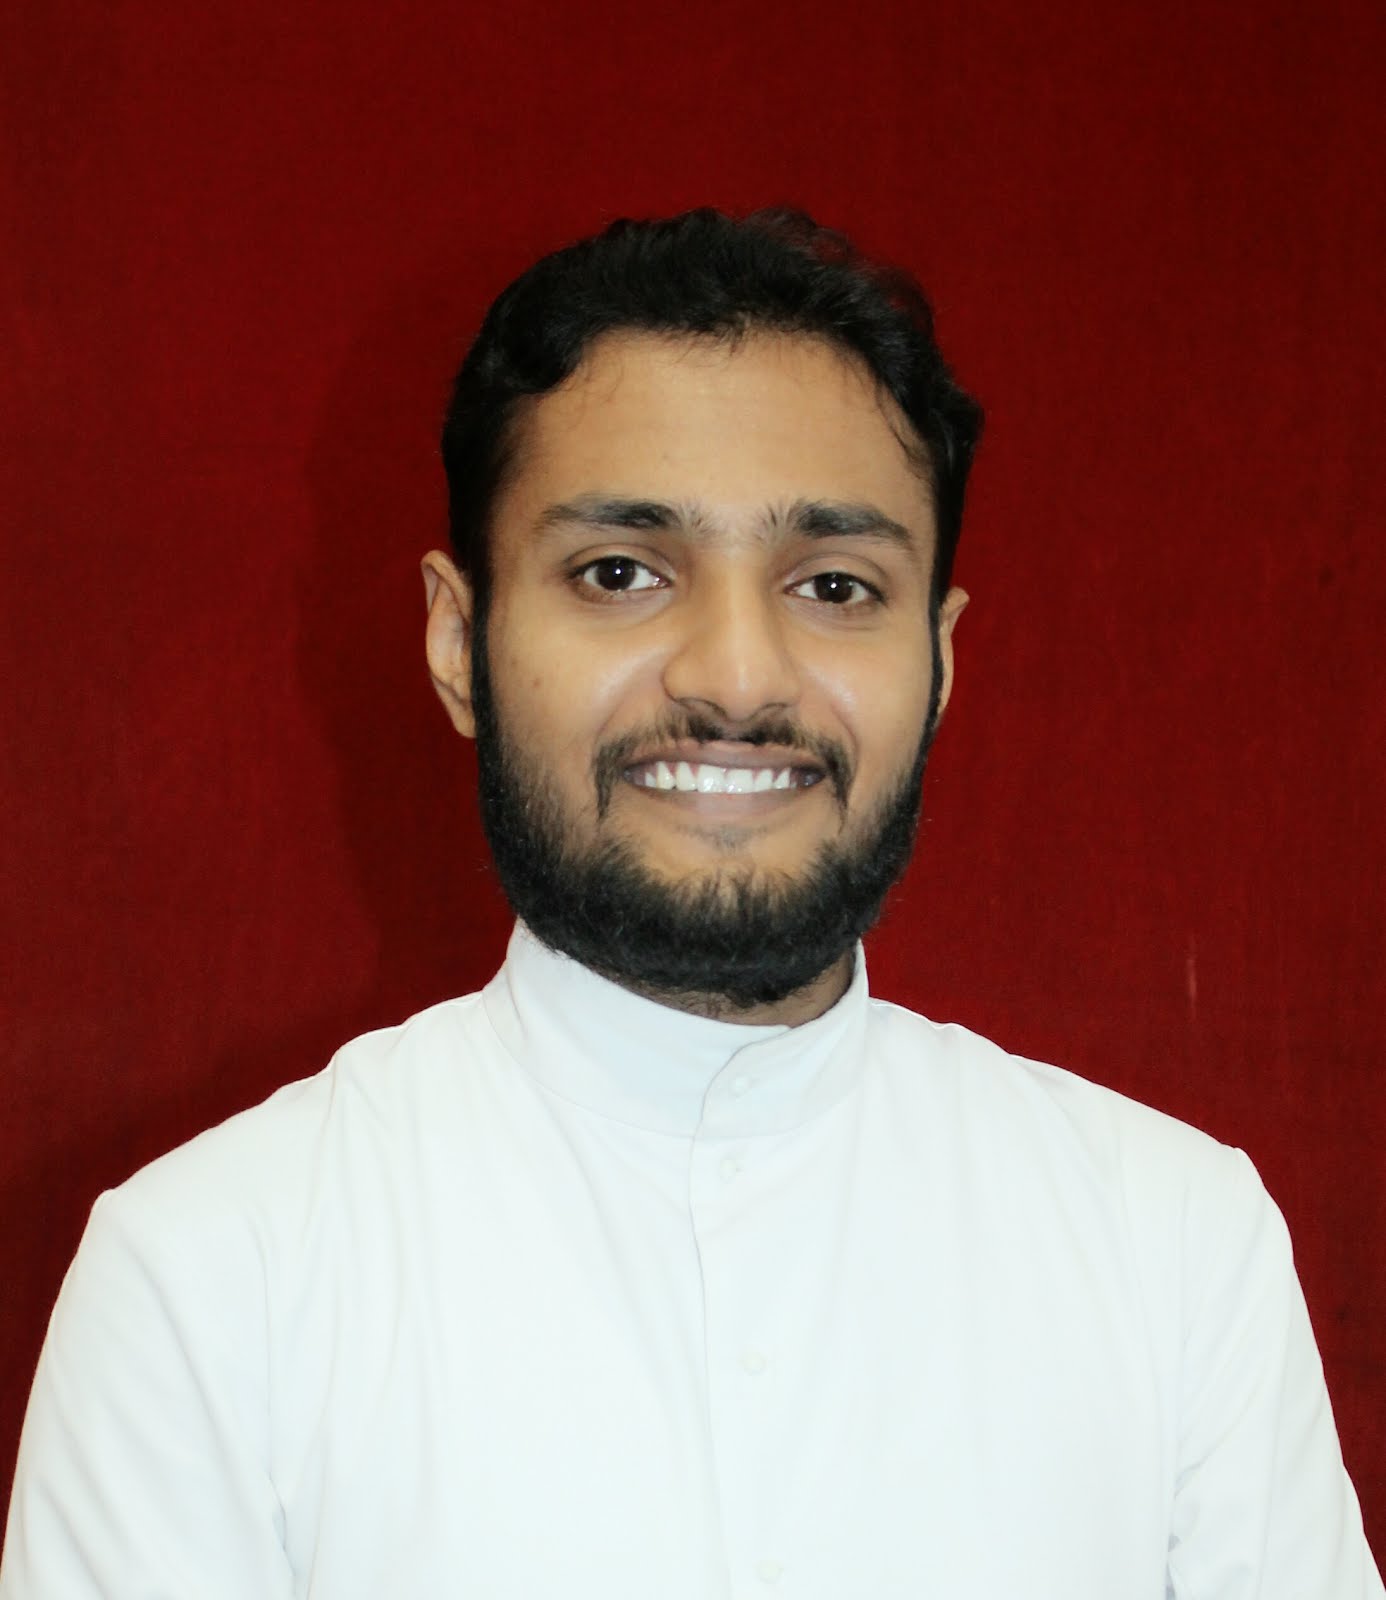 MCCL DIRECTOR, GURGAON DIOCESE